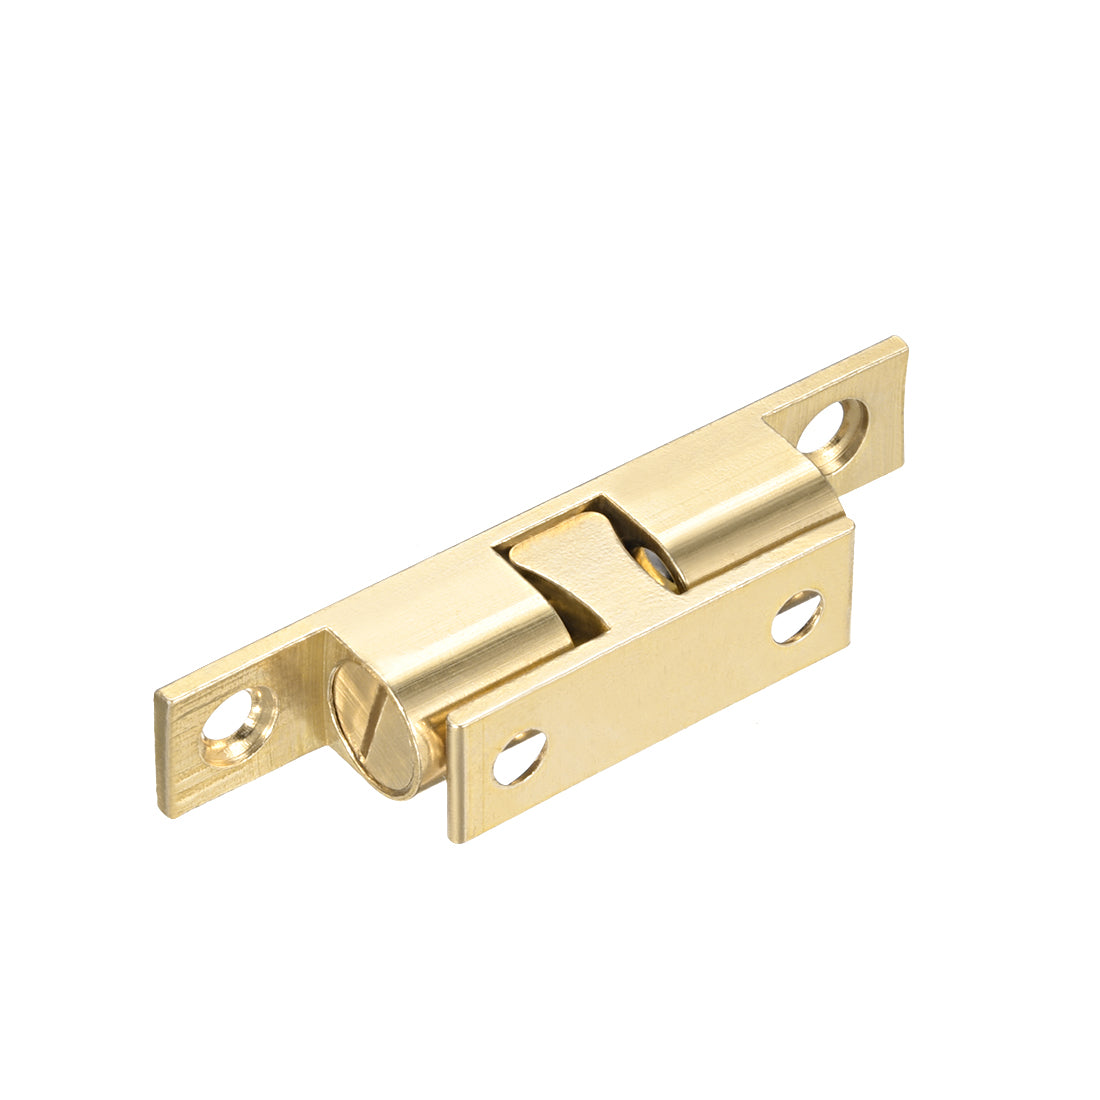 uxcell Uxcell Cabinet Door Closet Brass Double Ball Catch Tension Latch 70mm Length Gold Tone